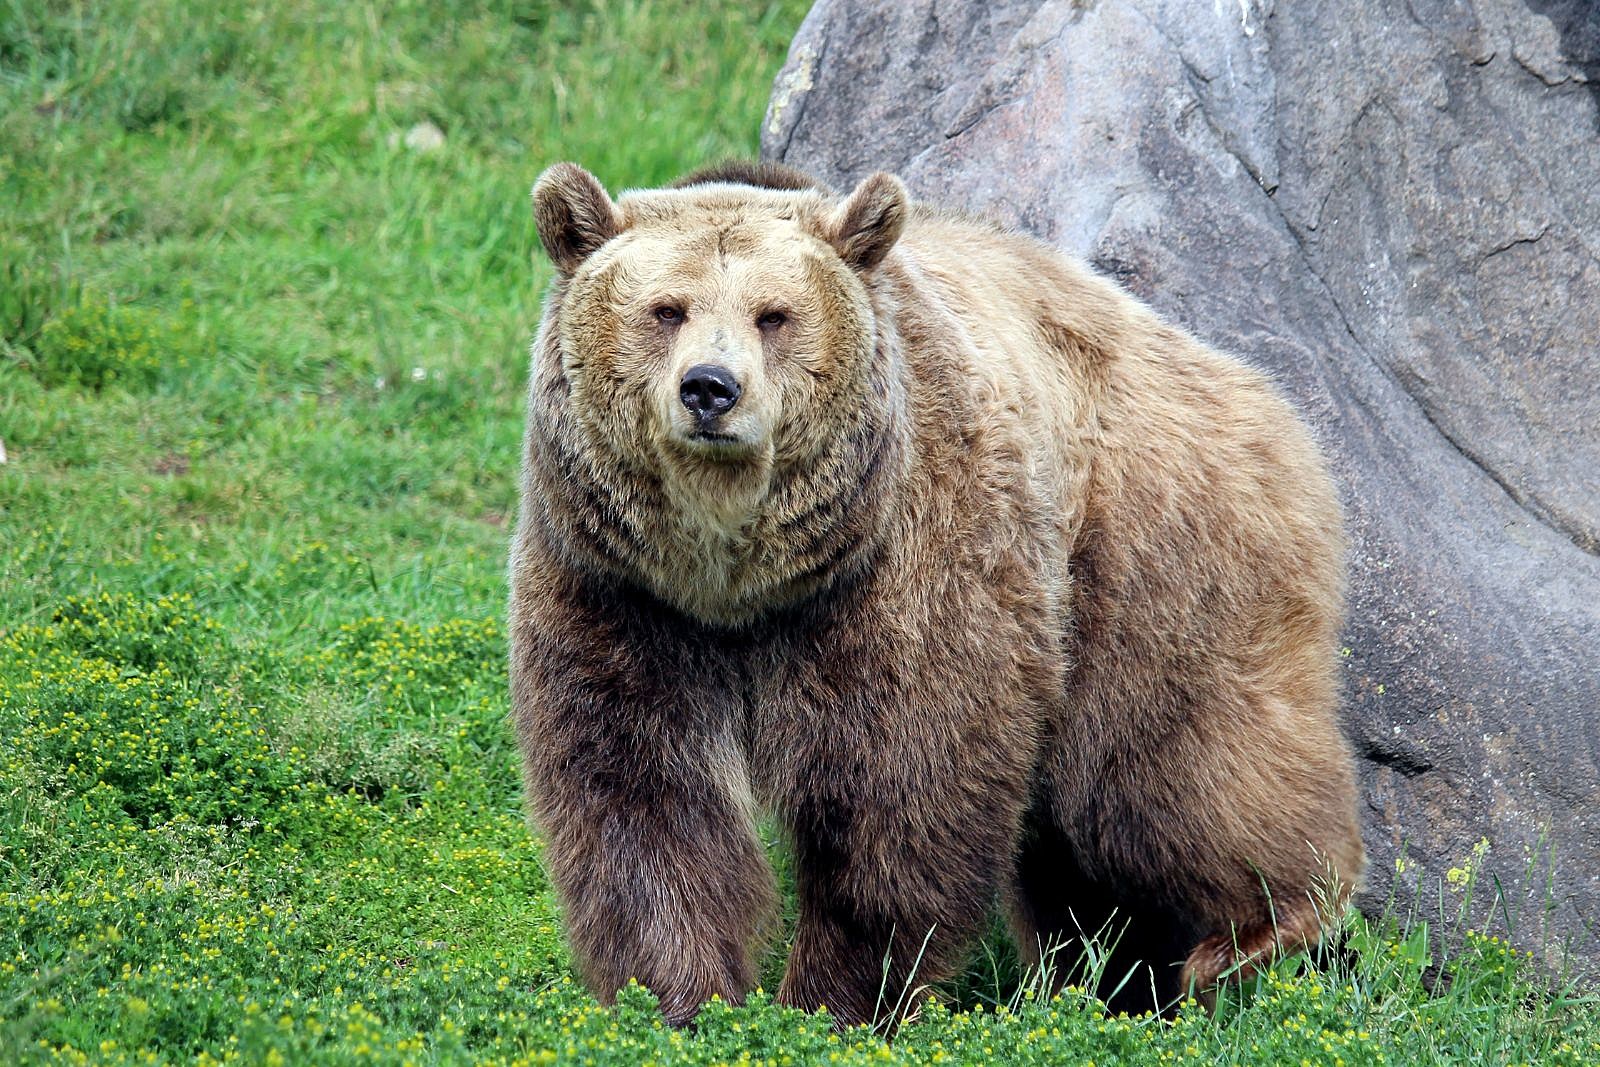 5 Good Wyoming Grizzly Bear Recipes [VIDEOS]